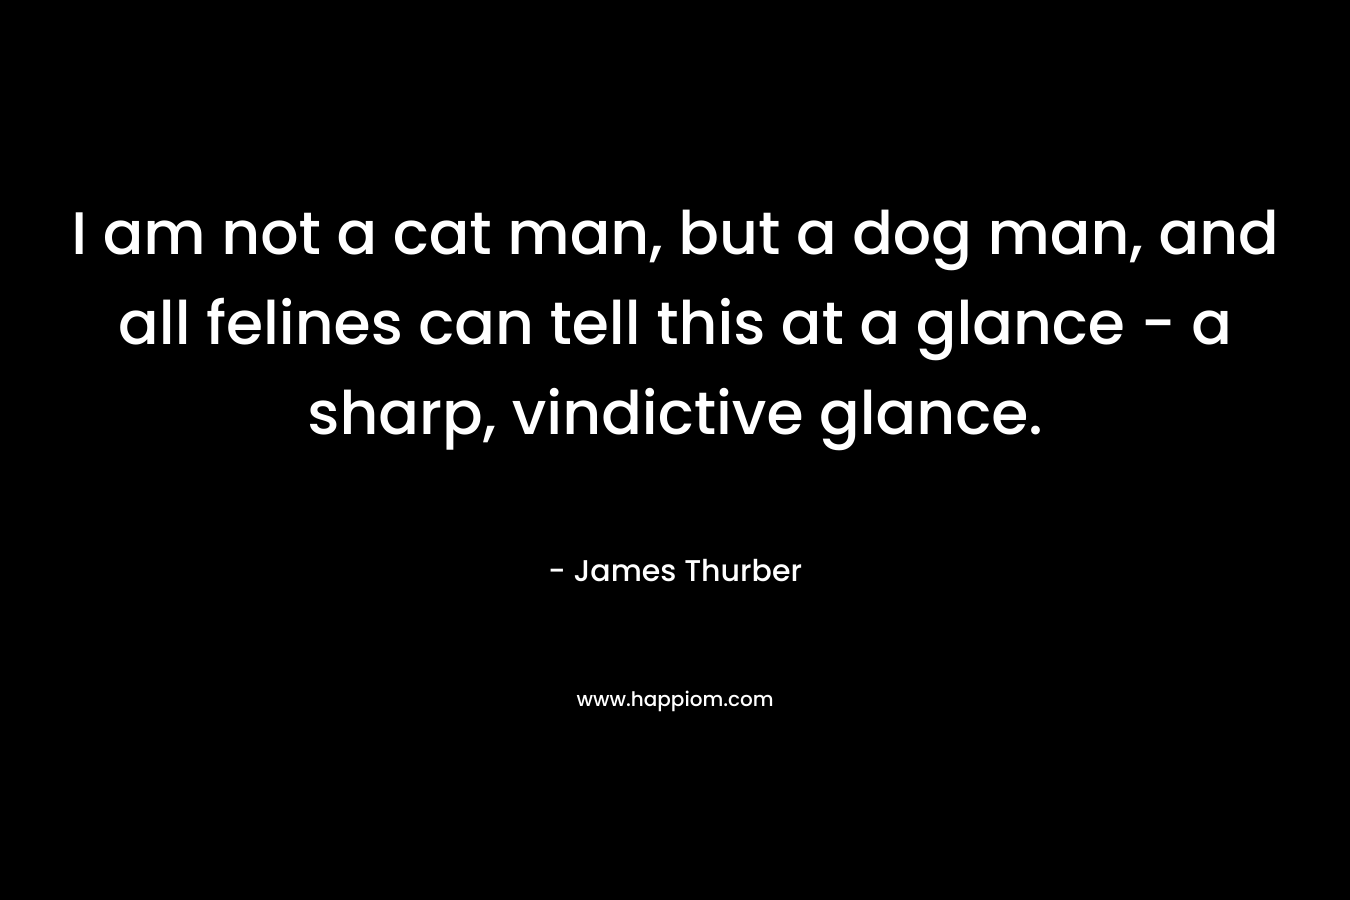 I am not a cat man, but a dog man, and all felines can tell this at a glance - a sharp, vindictive glance. 